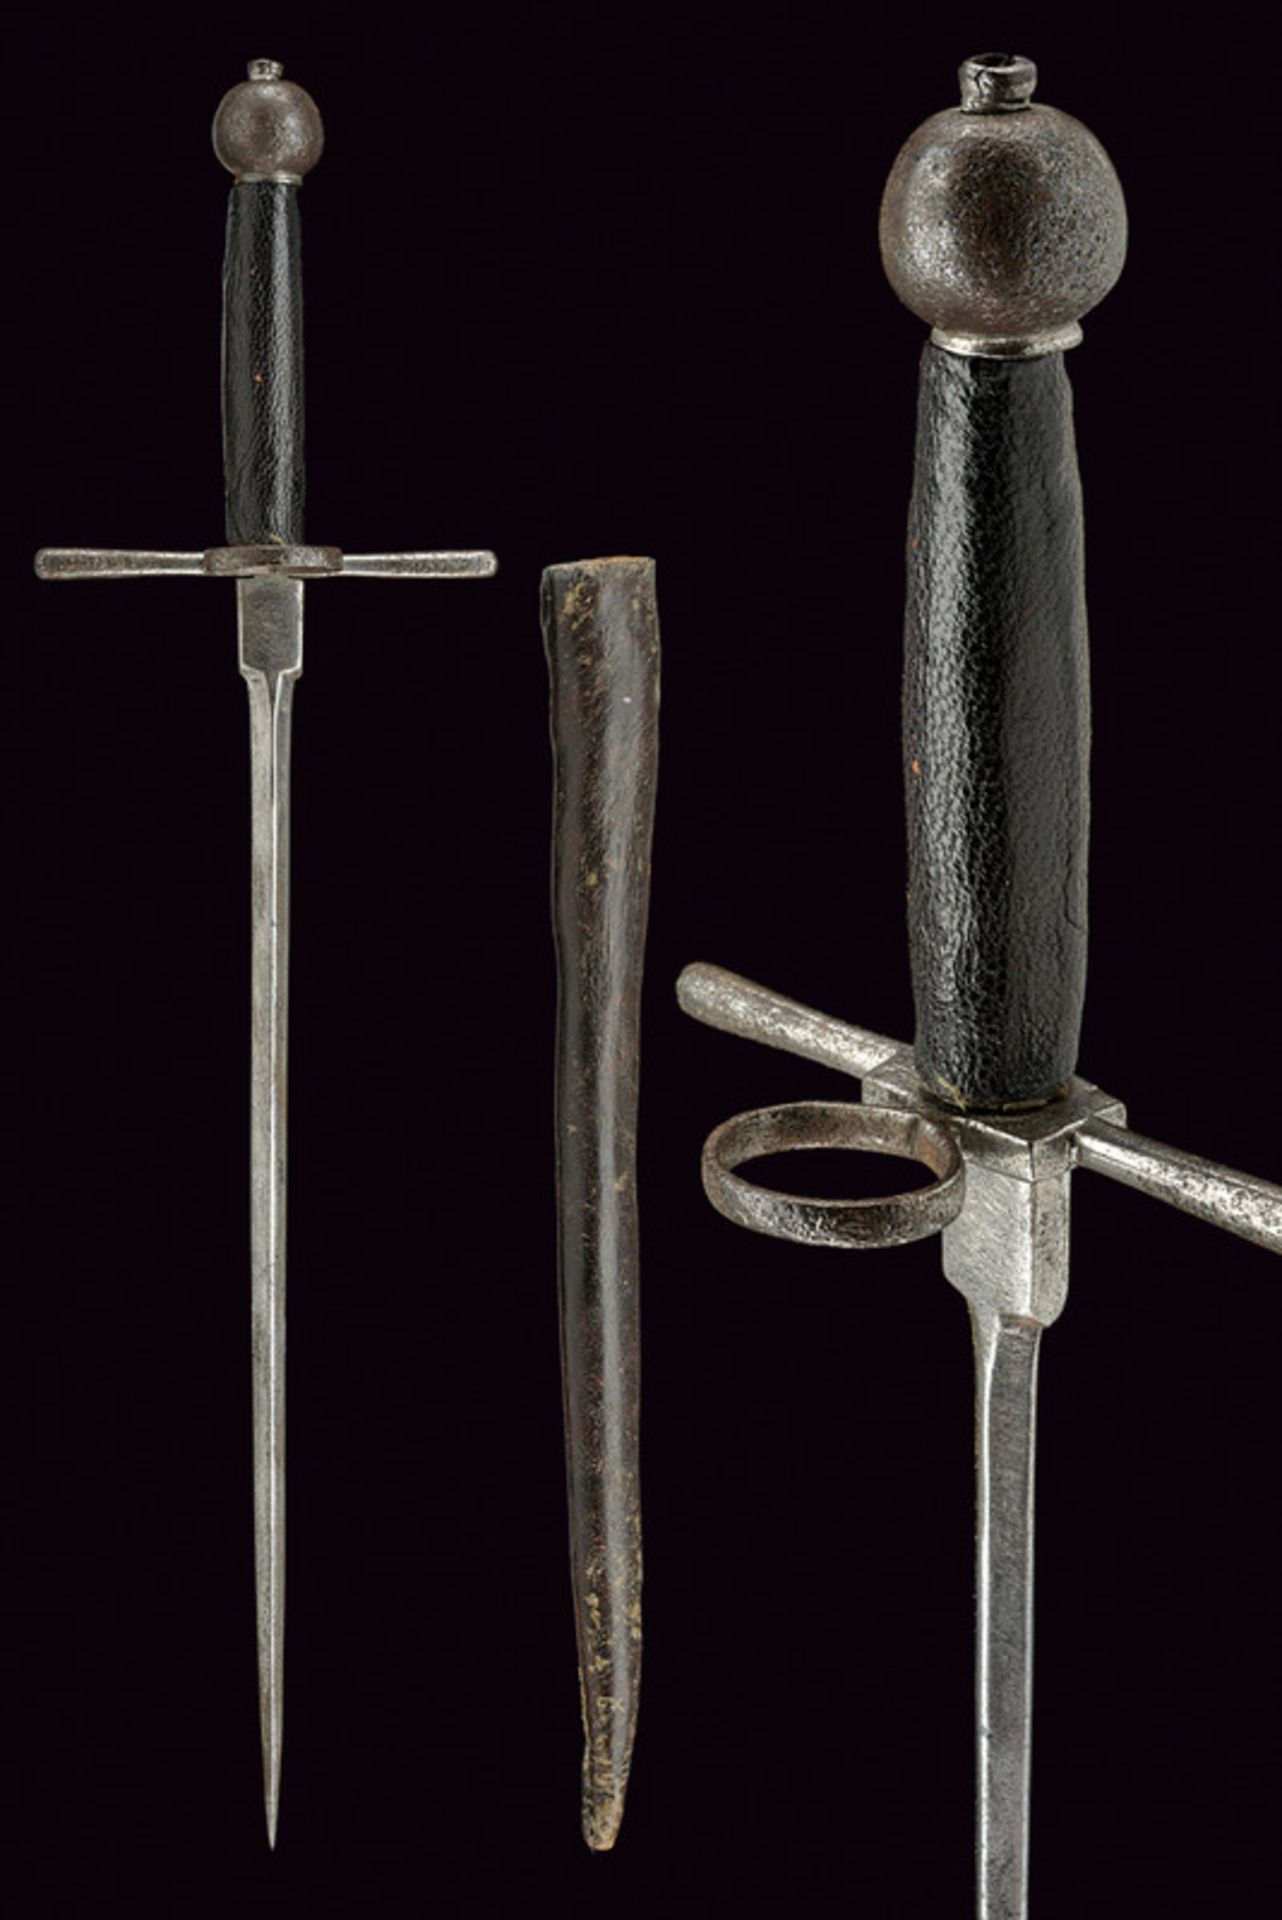 A left-hand dagger dating: early 17th Century provenance: Italy Strong, straight, stiletto-like